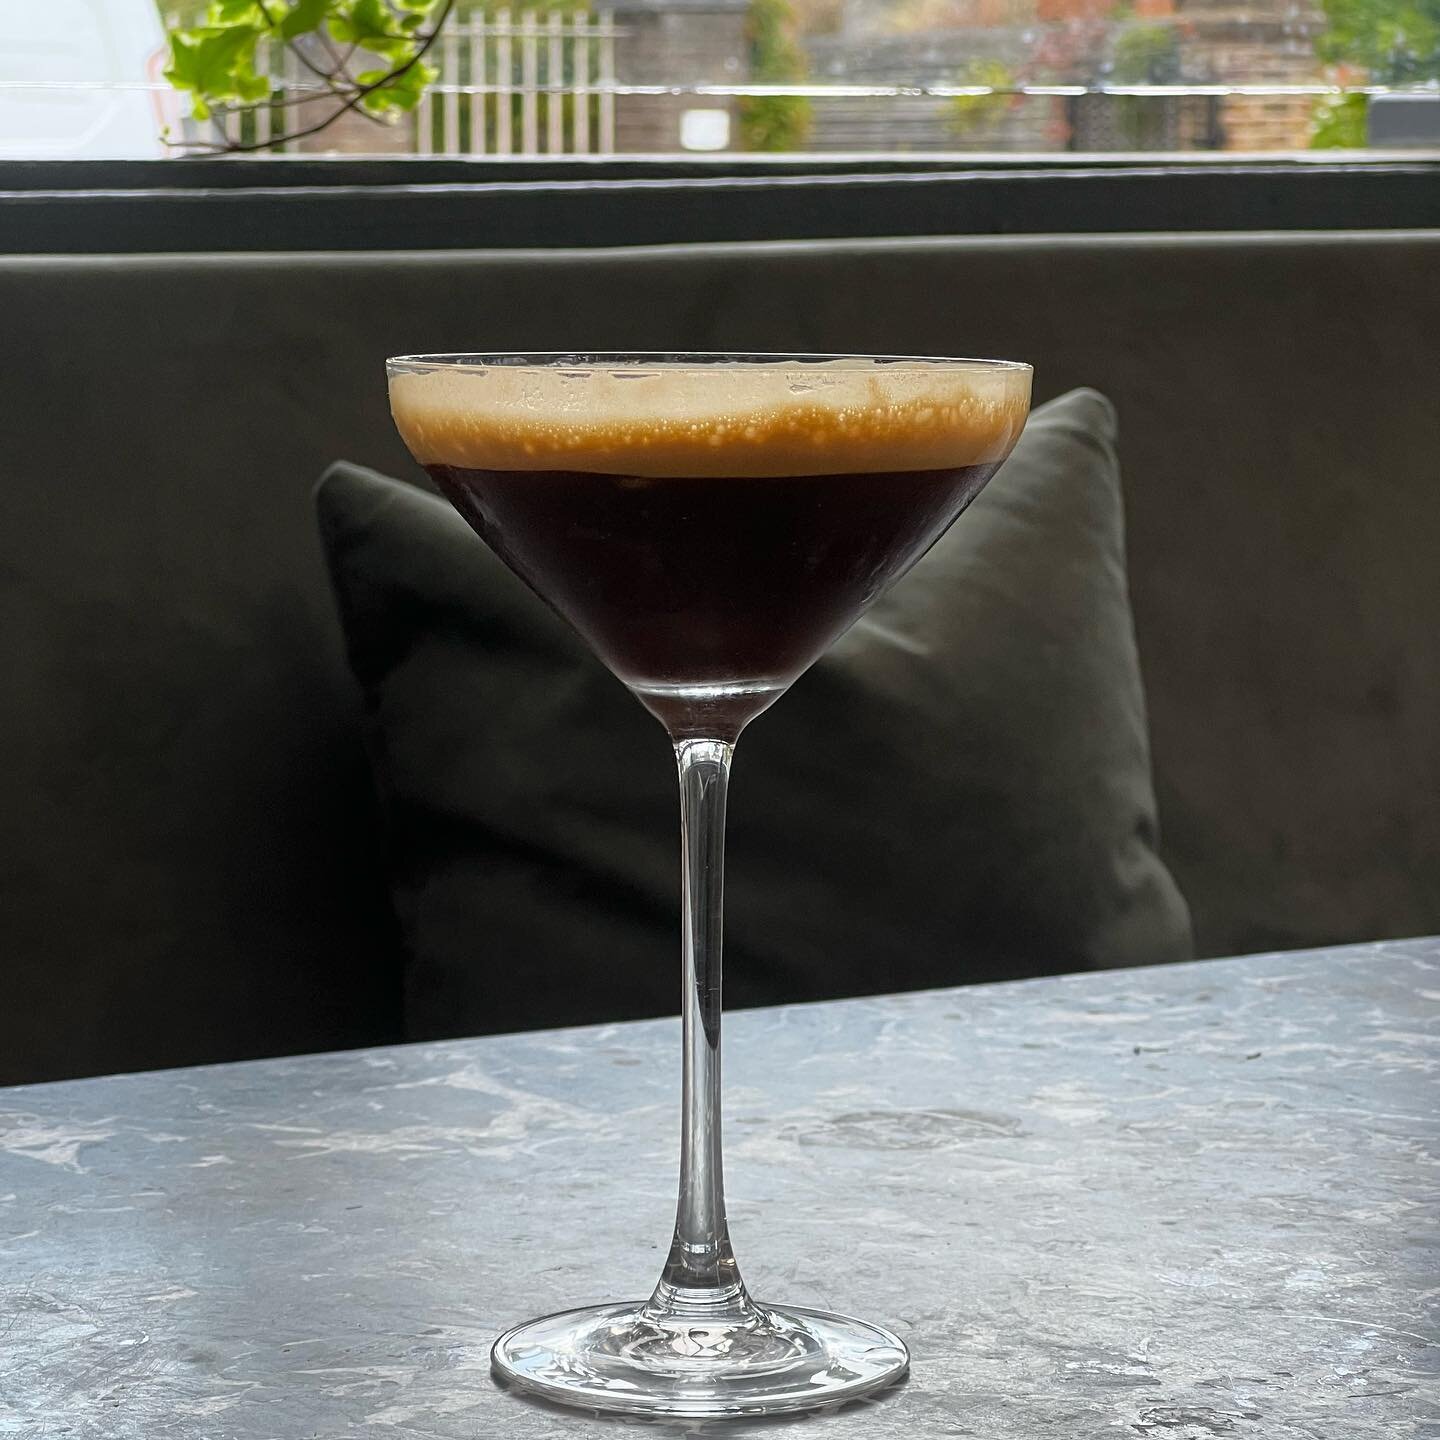 Monday Martini? Cure the blues from the British summer time with an Espresso Martini pick-me-up 🍸 

#espressomartini #kensalrise #thechamberlayne #kensalgreen #queenspark